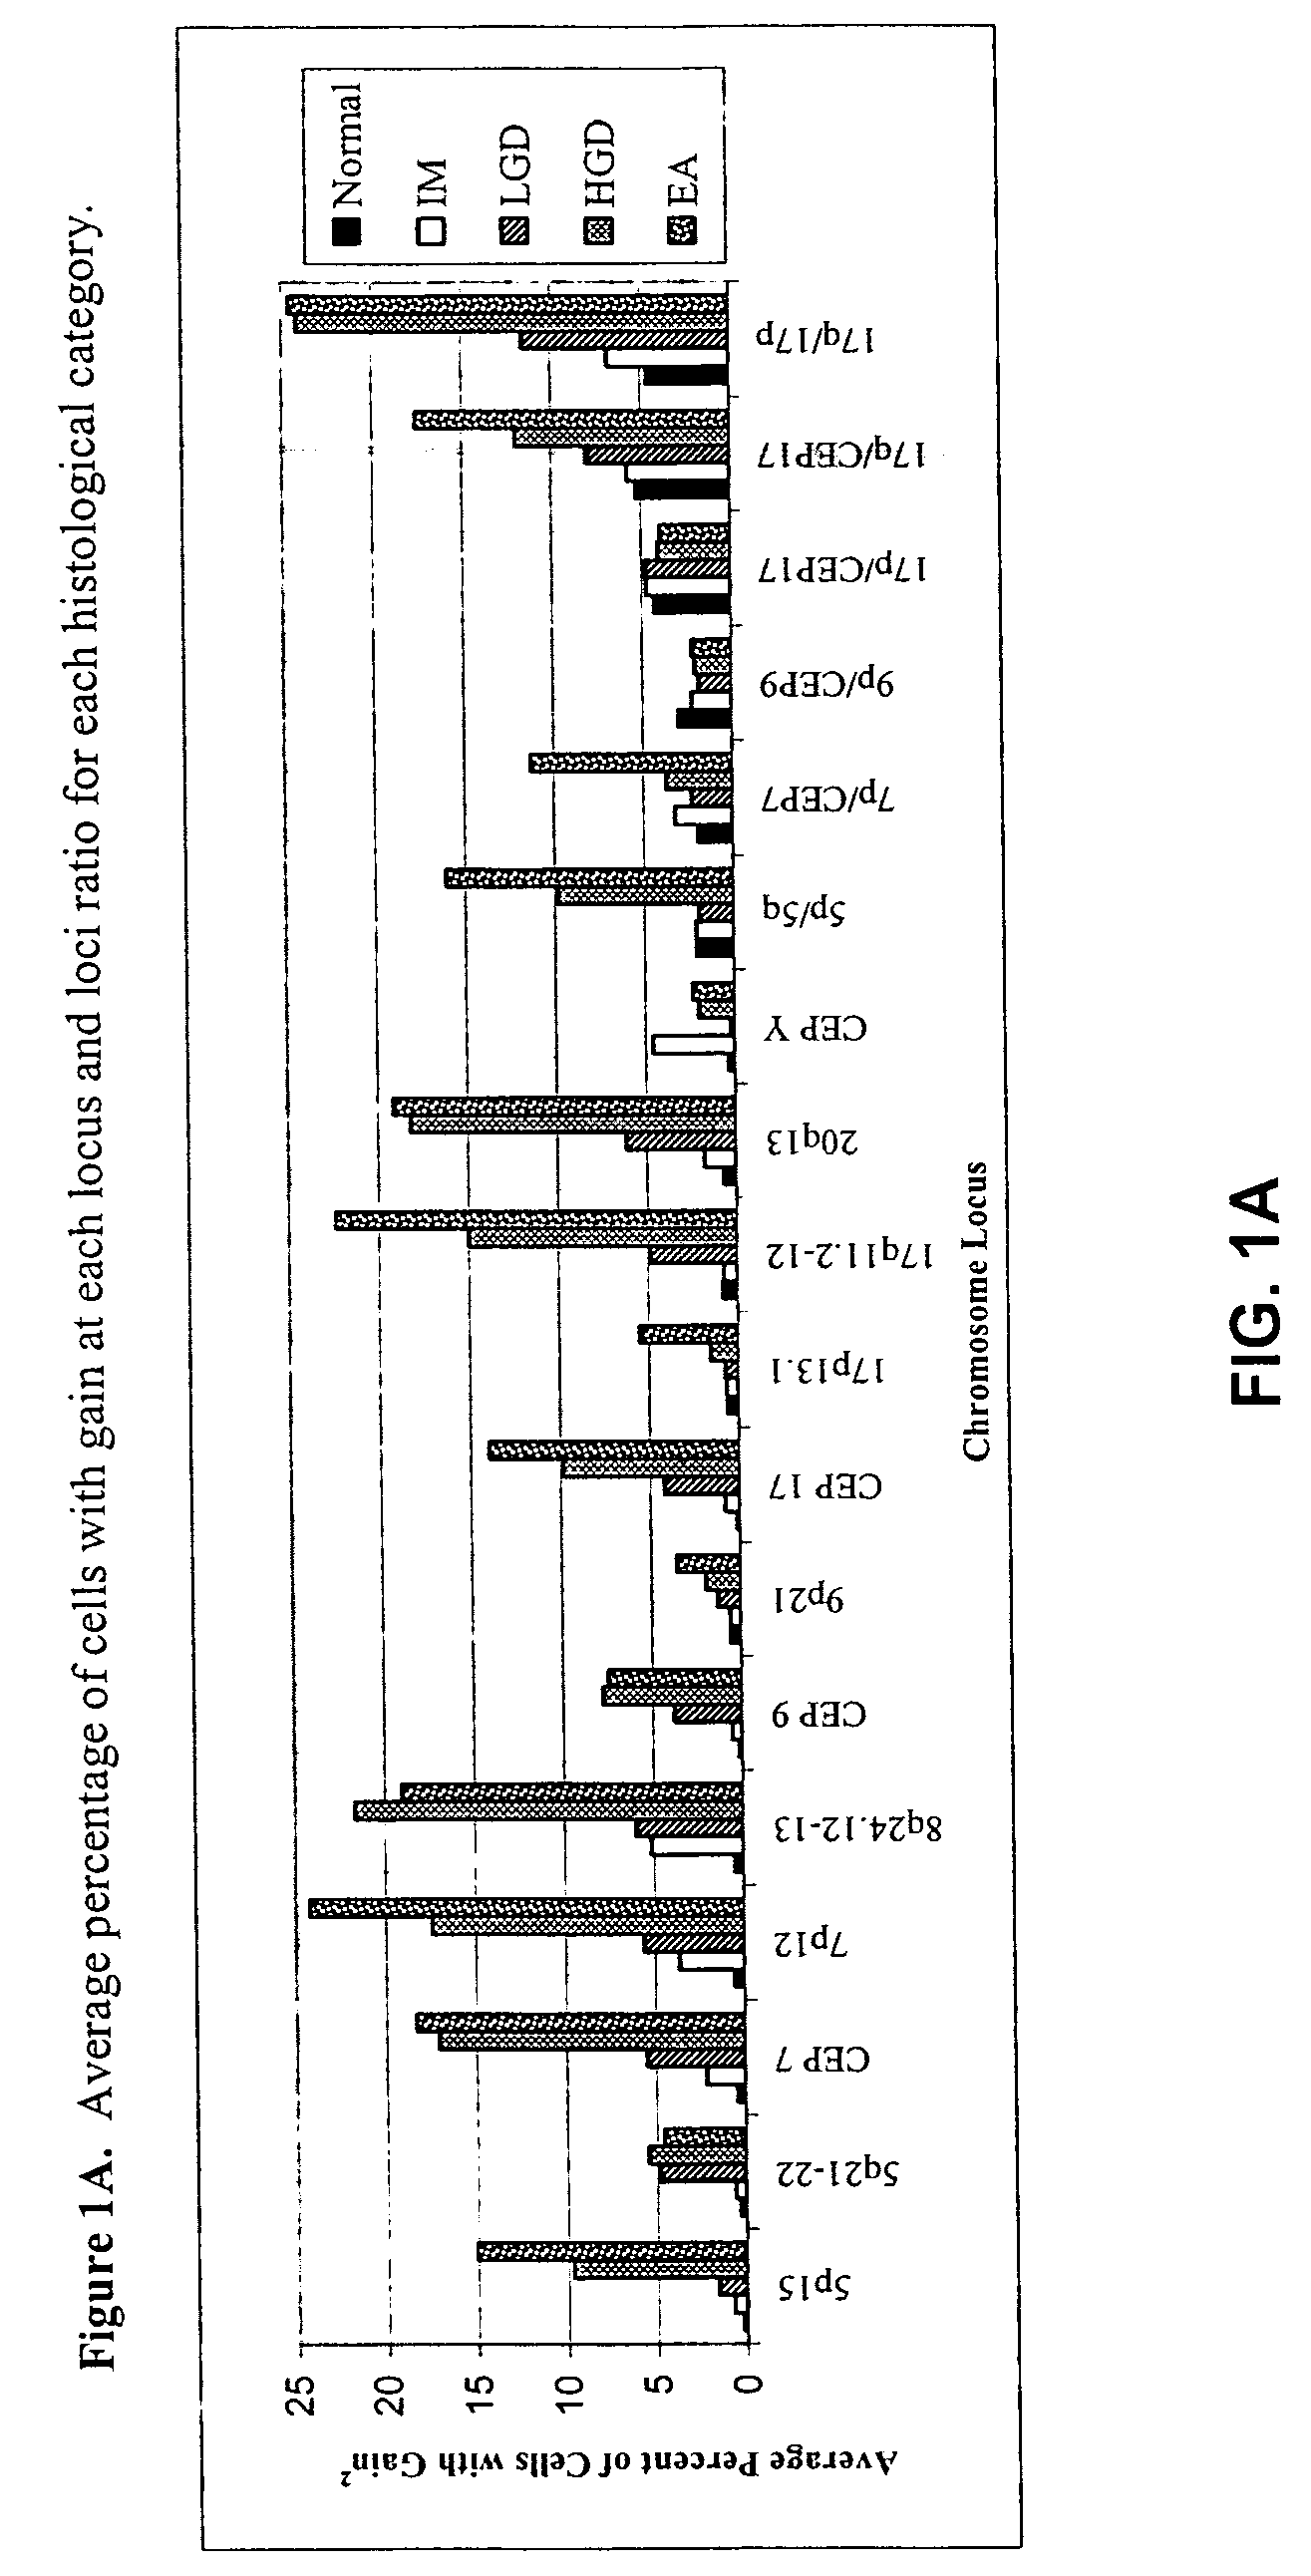 Methods and probes for detecting esophageal cancer